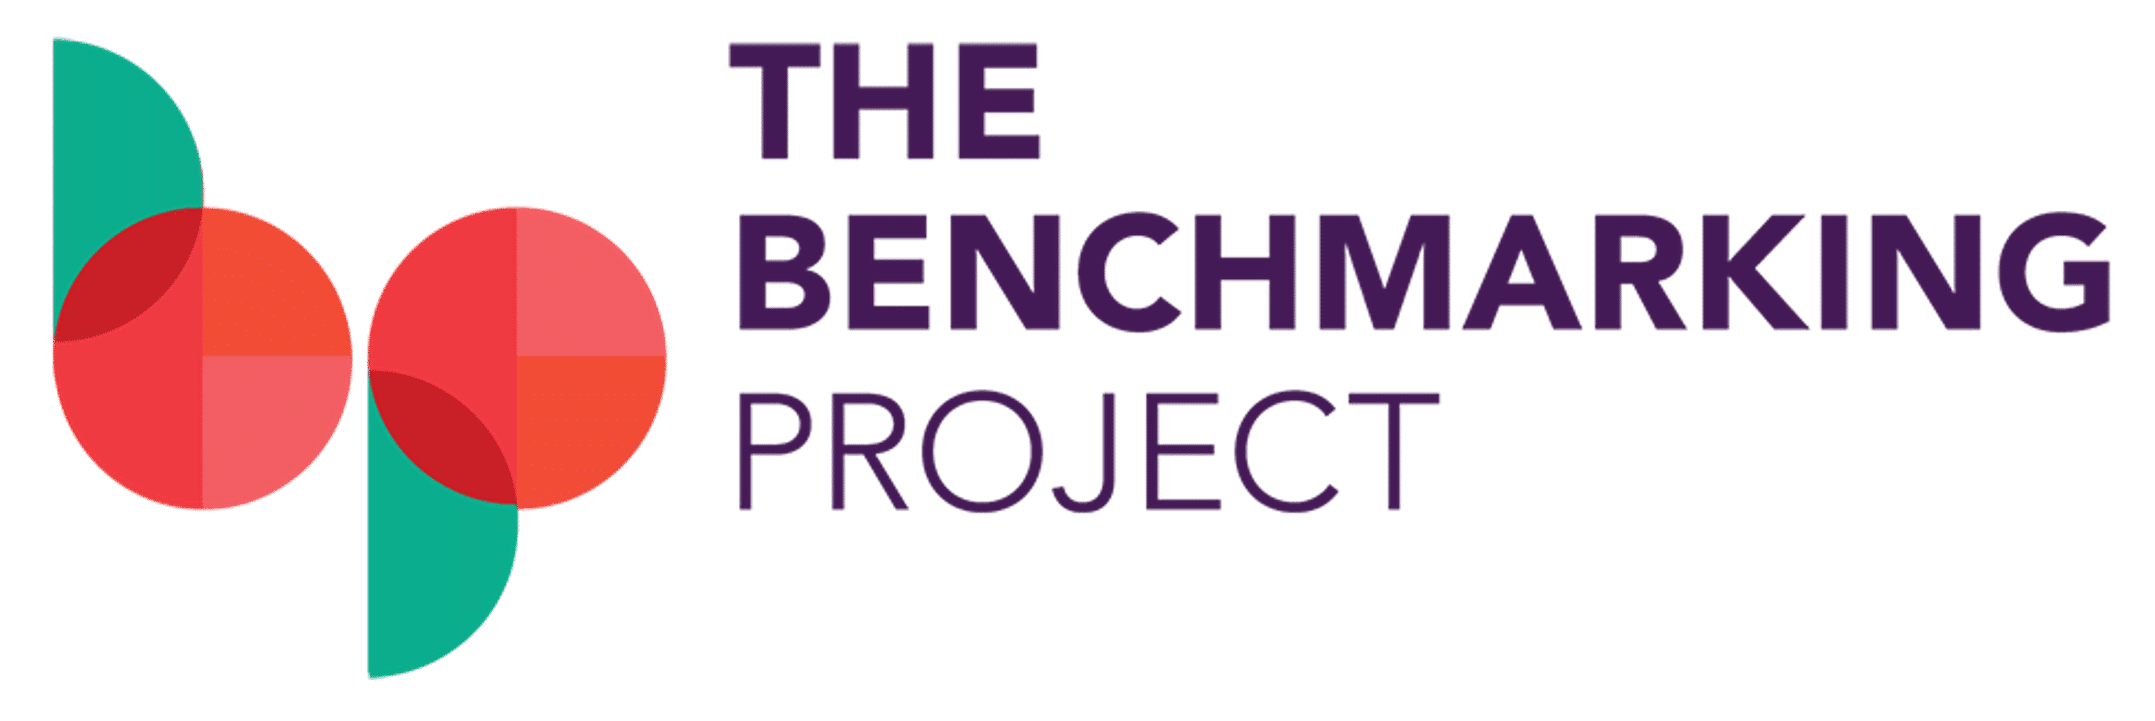 The Benchmarking Project